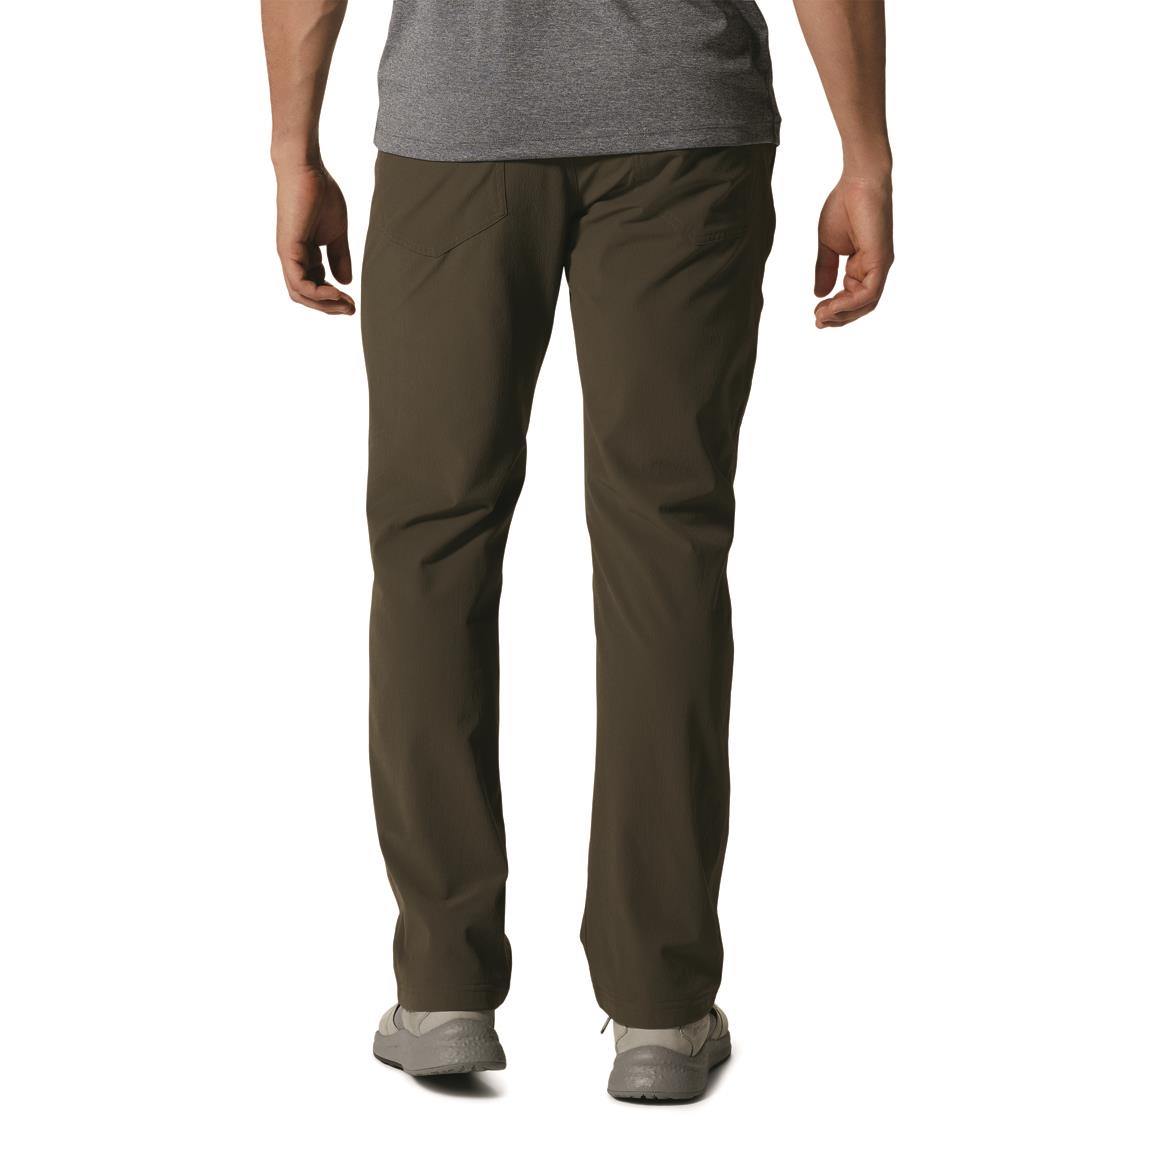 Guide Gear Men's Ripstop Cargo Work Pants - 621473, Jeans & Pants at ...